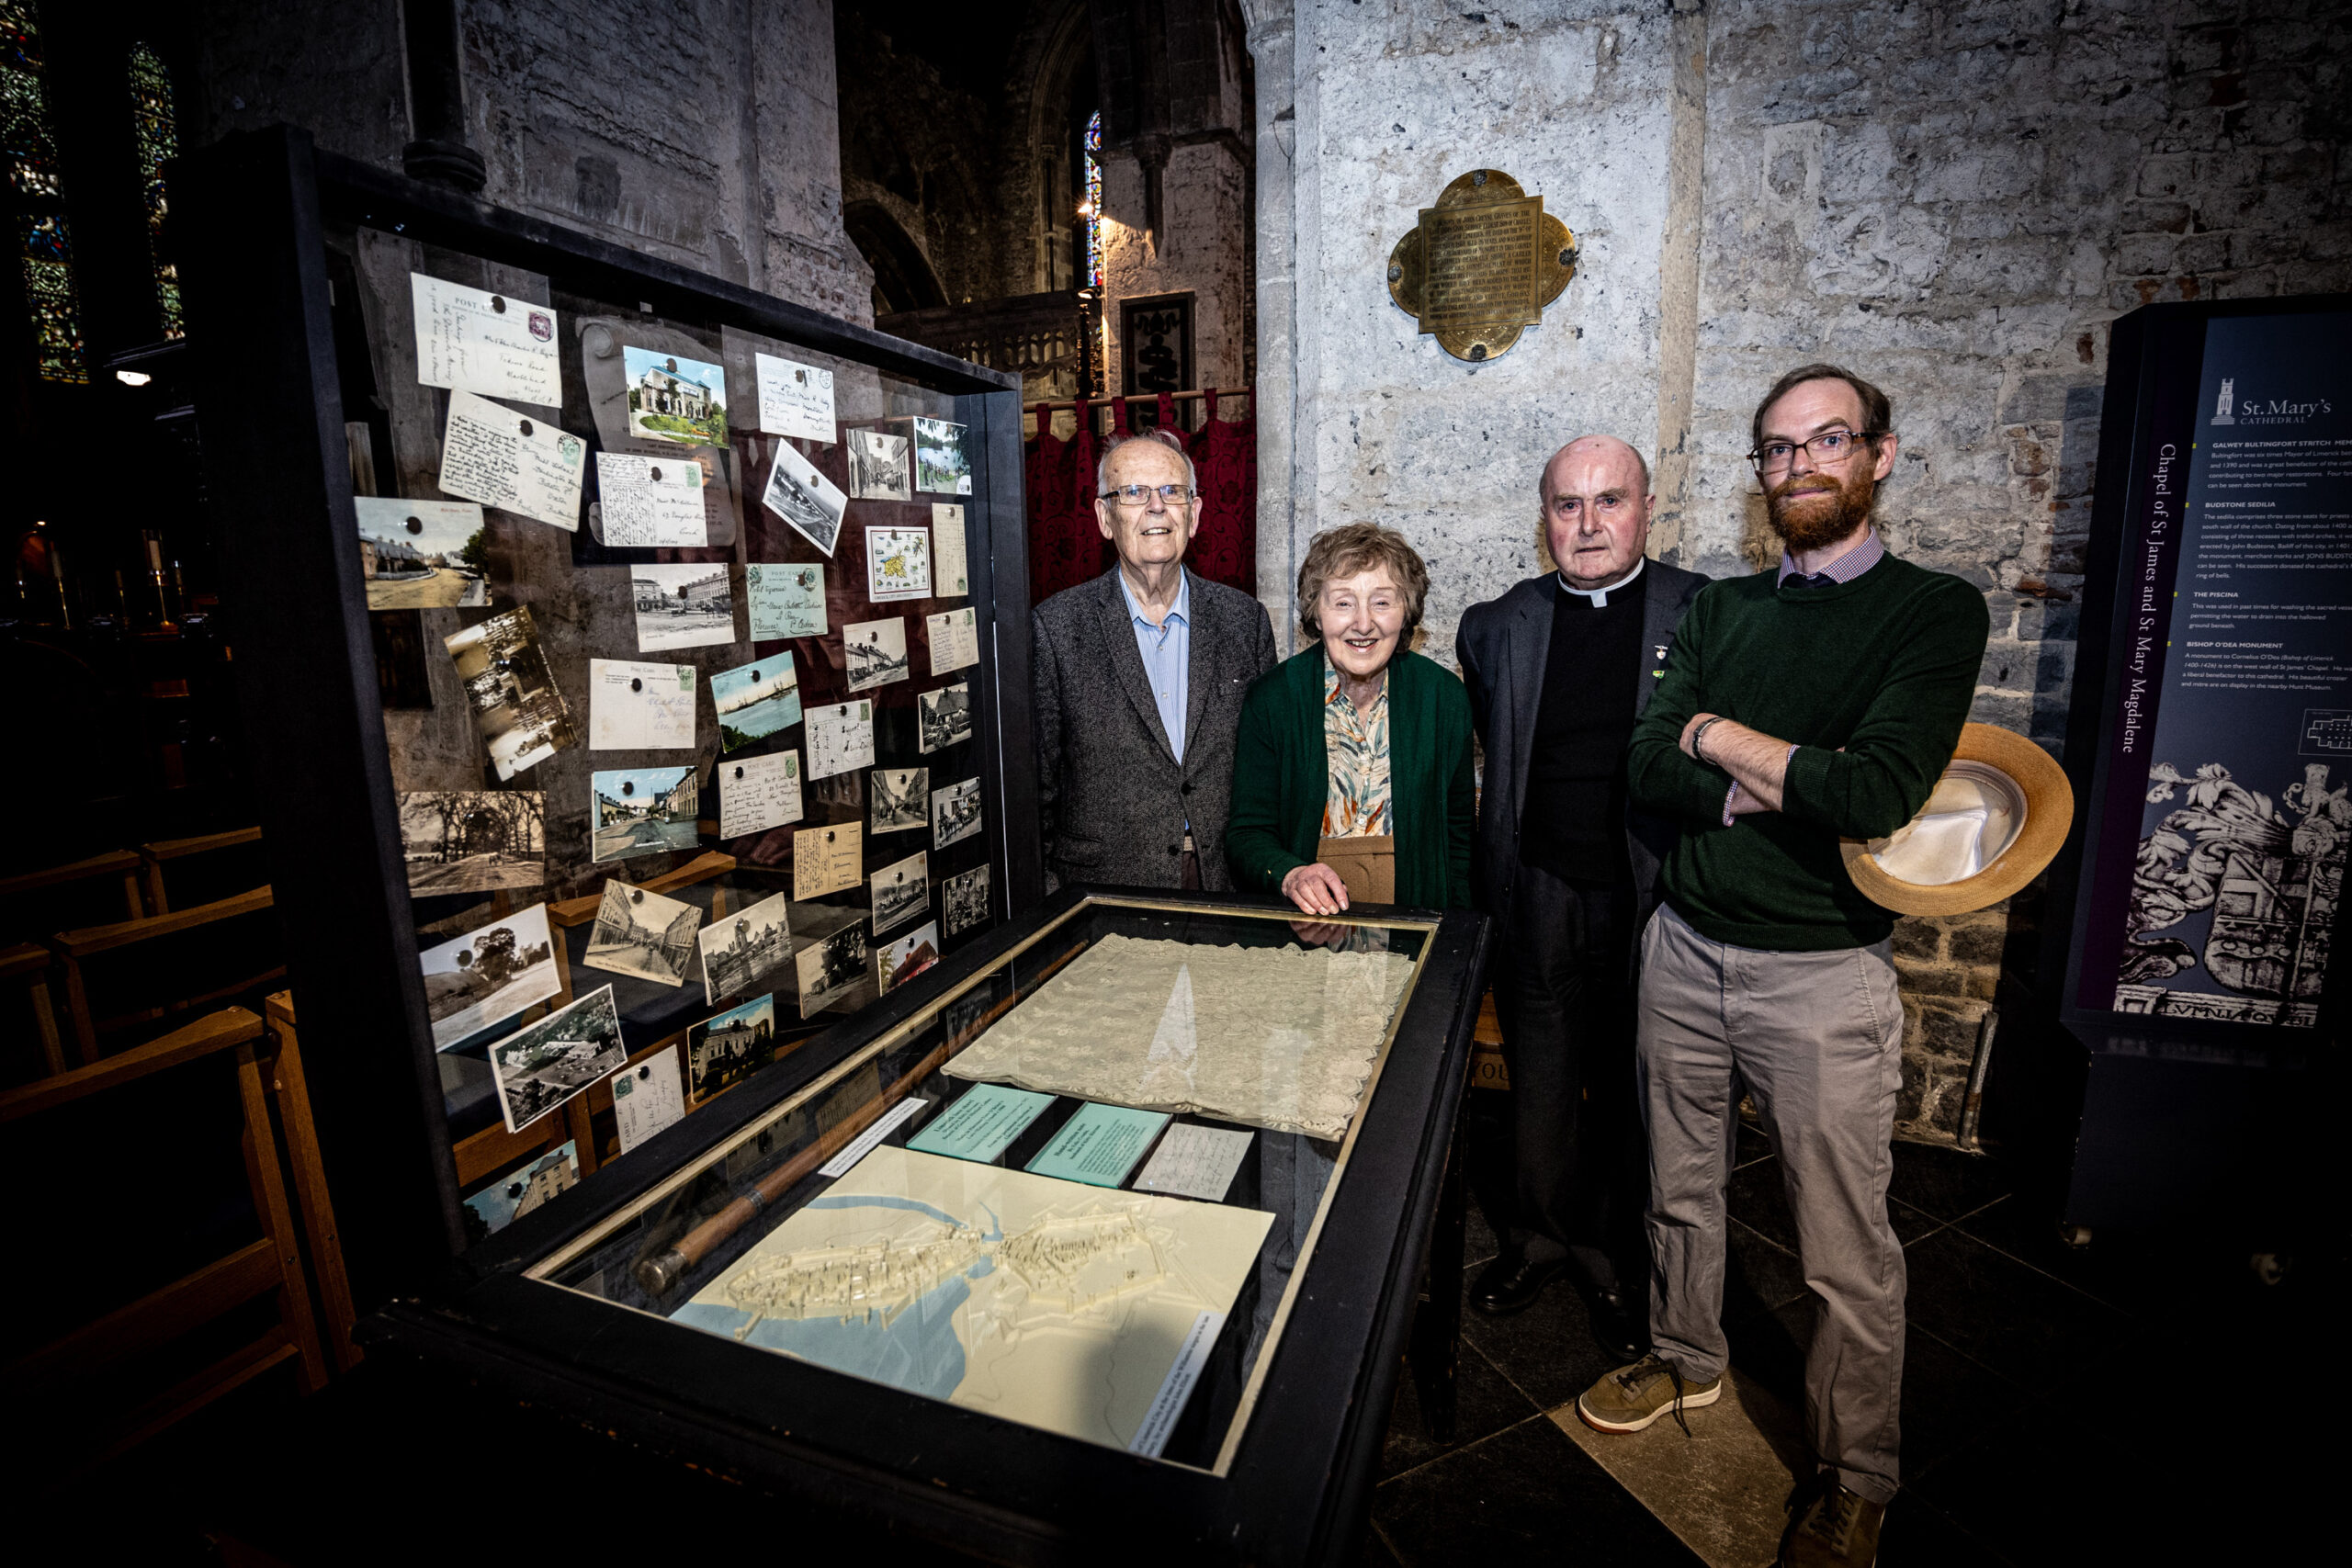 Postcards From Limerick exhibition explores the rich history of Limerick through the largest collection of Limerick-related postcards